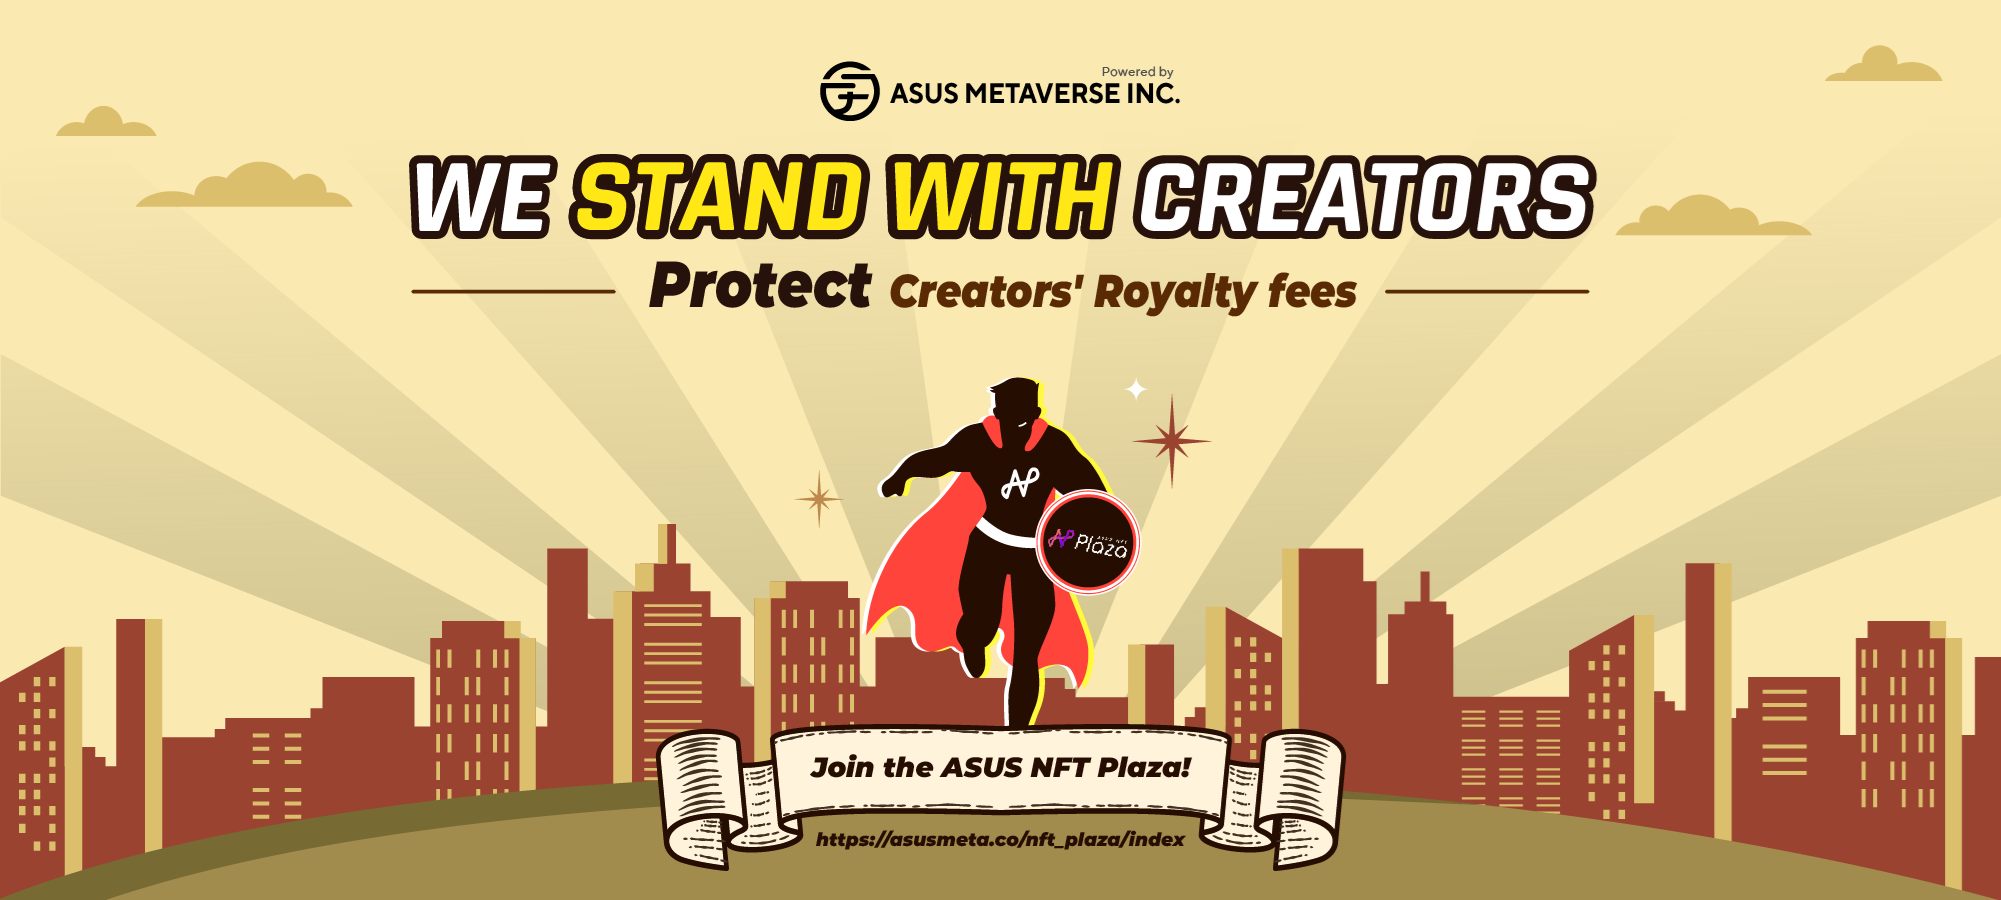 ASUS NFT Plaza Affirms Commitment to Protect Creators' Royalties